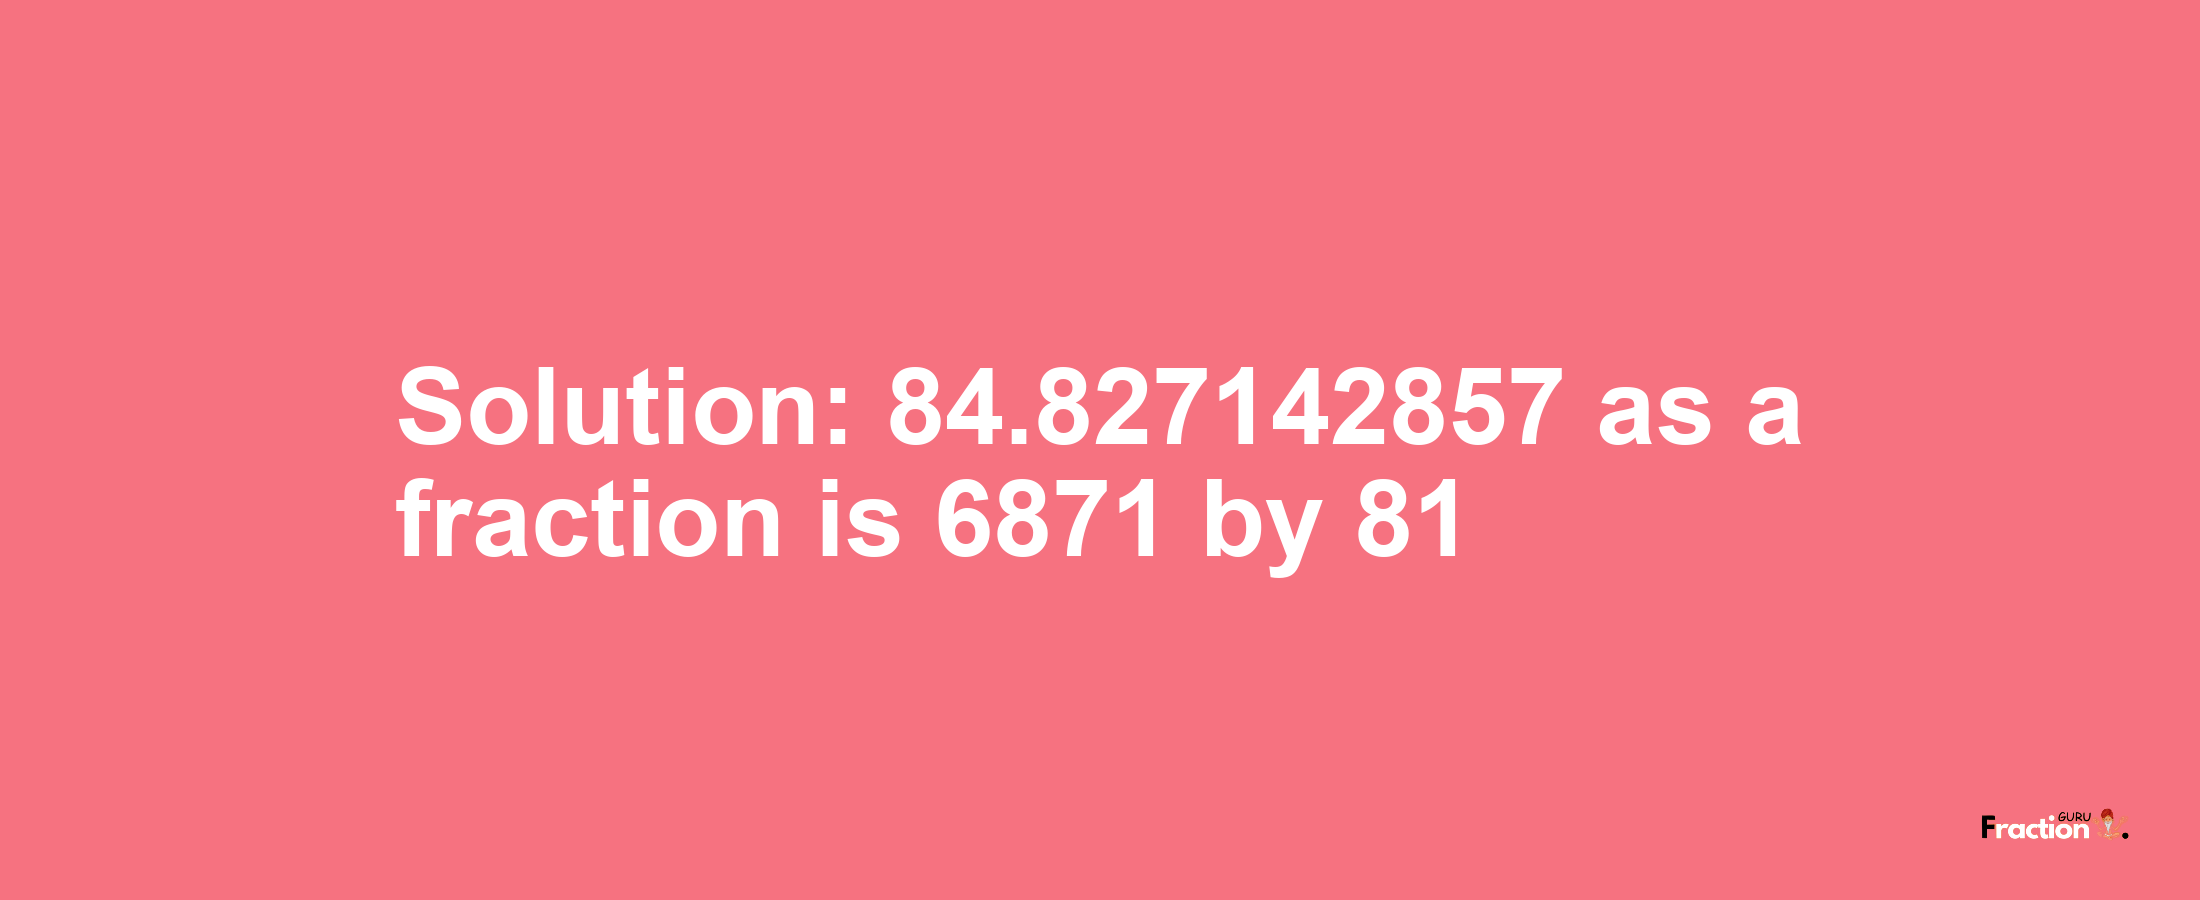 Solution:84.827142857 as a fraction is 6871/81